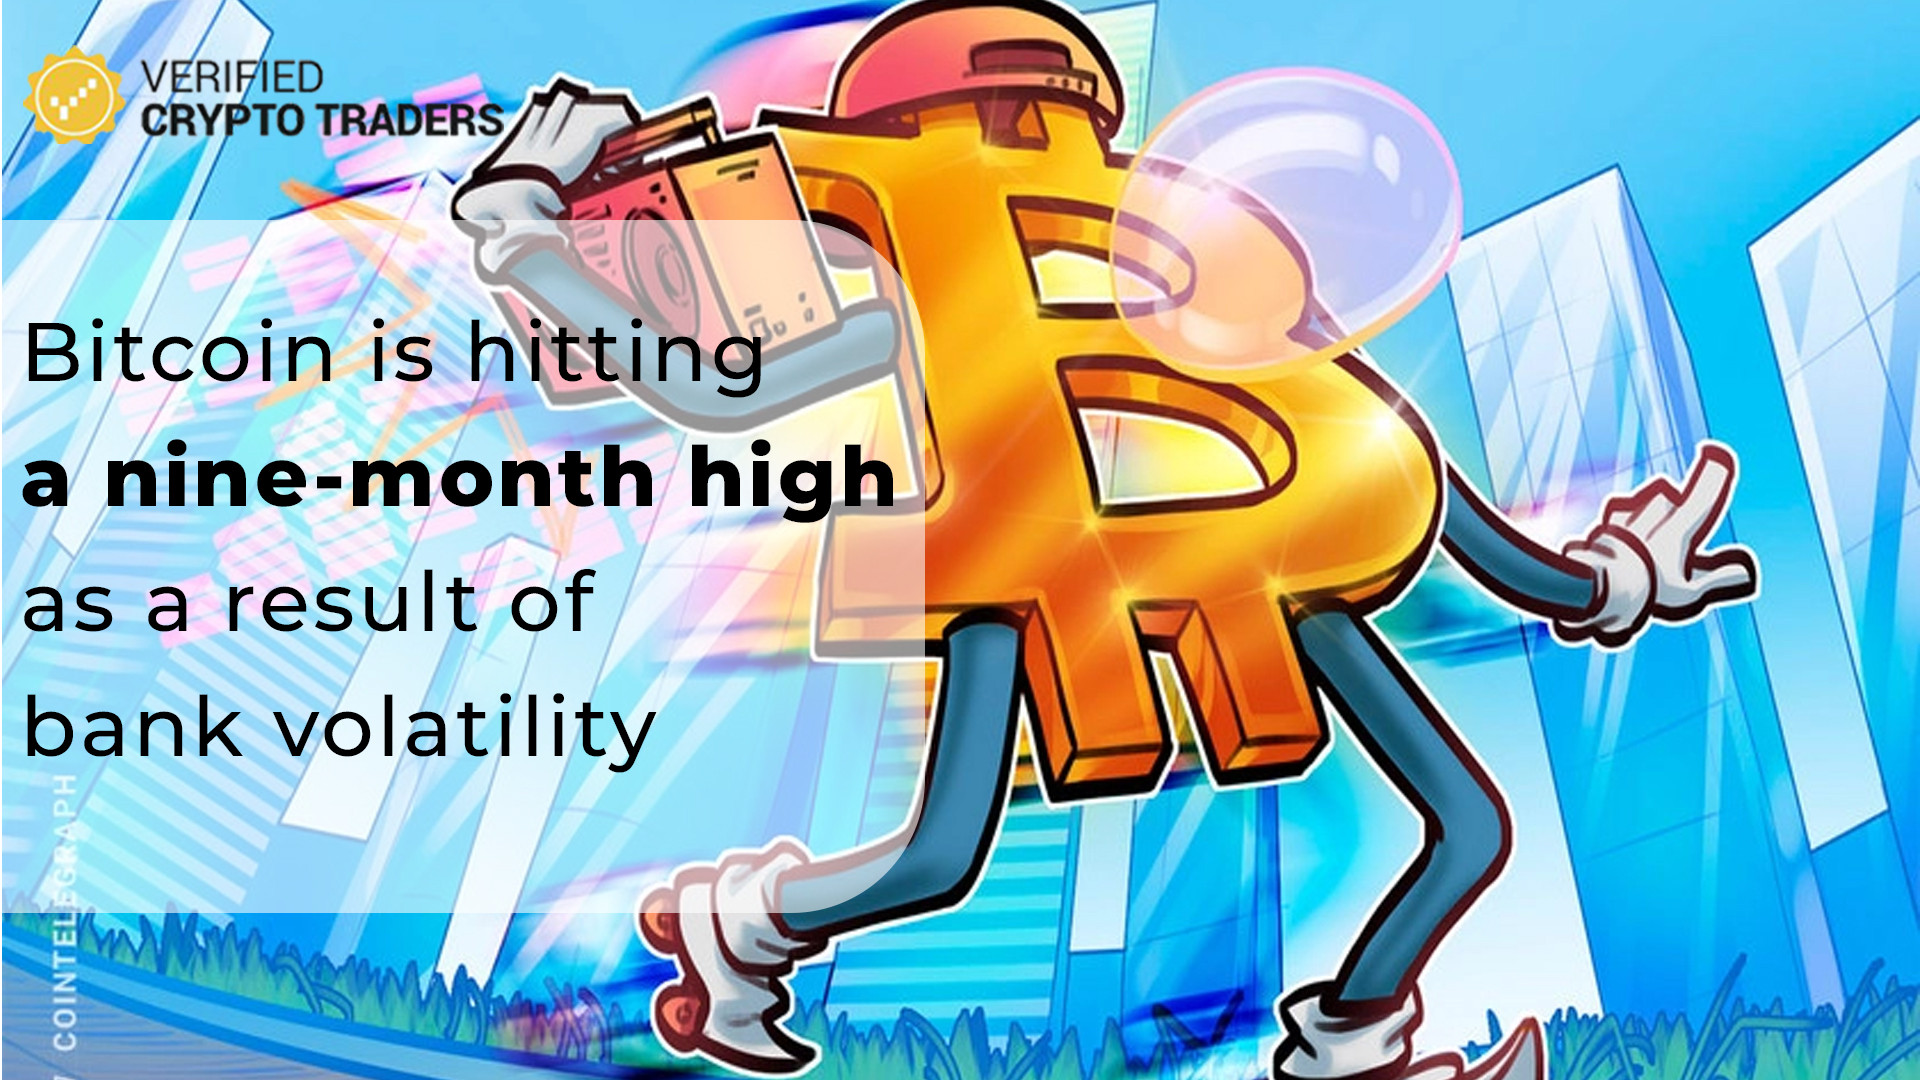 Bitcoin is striking a nine-month high as a result of bank volatility